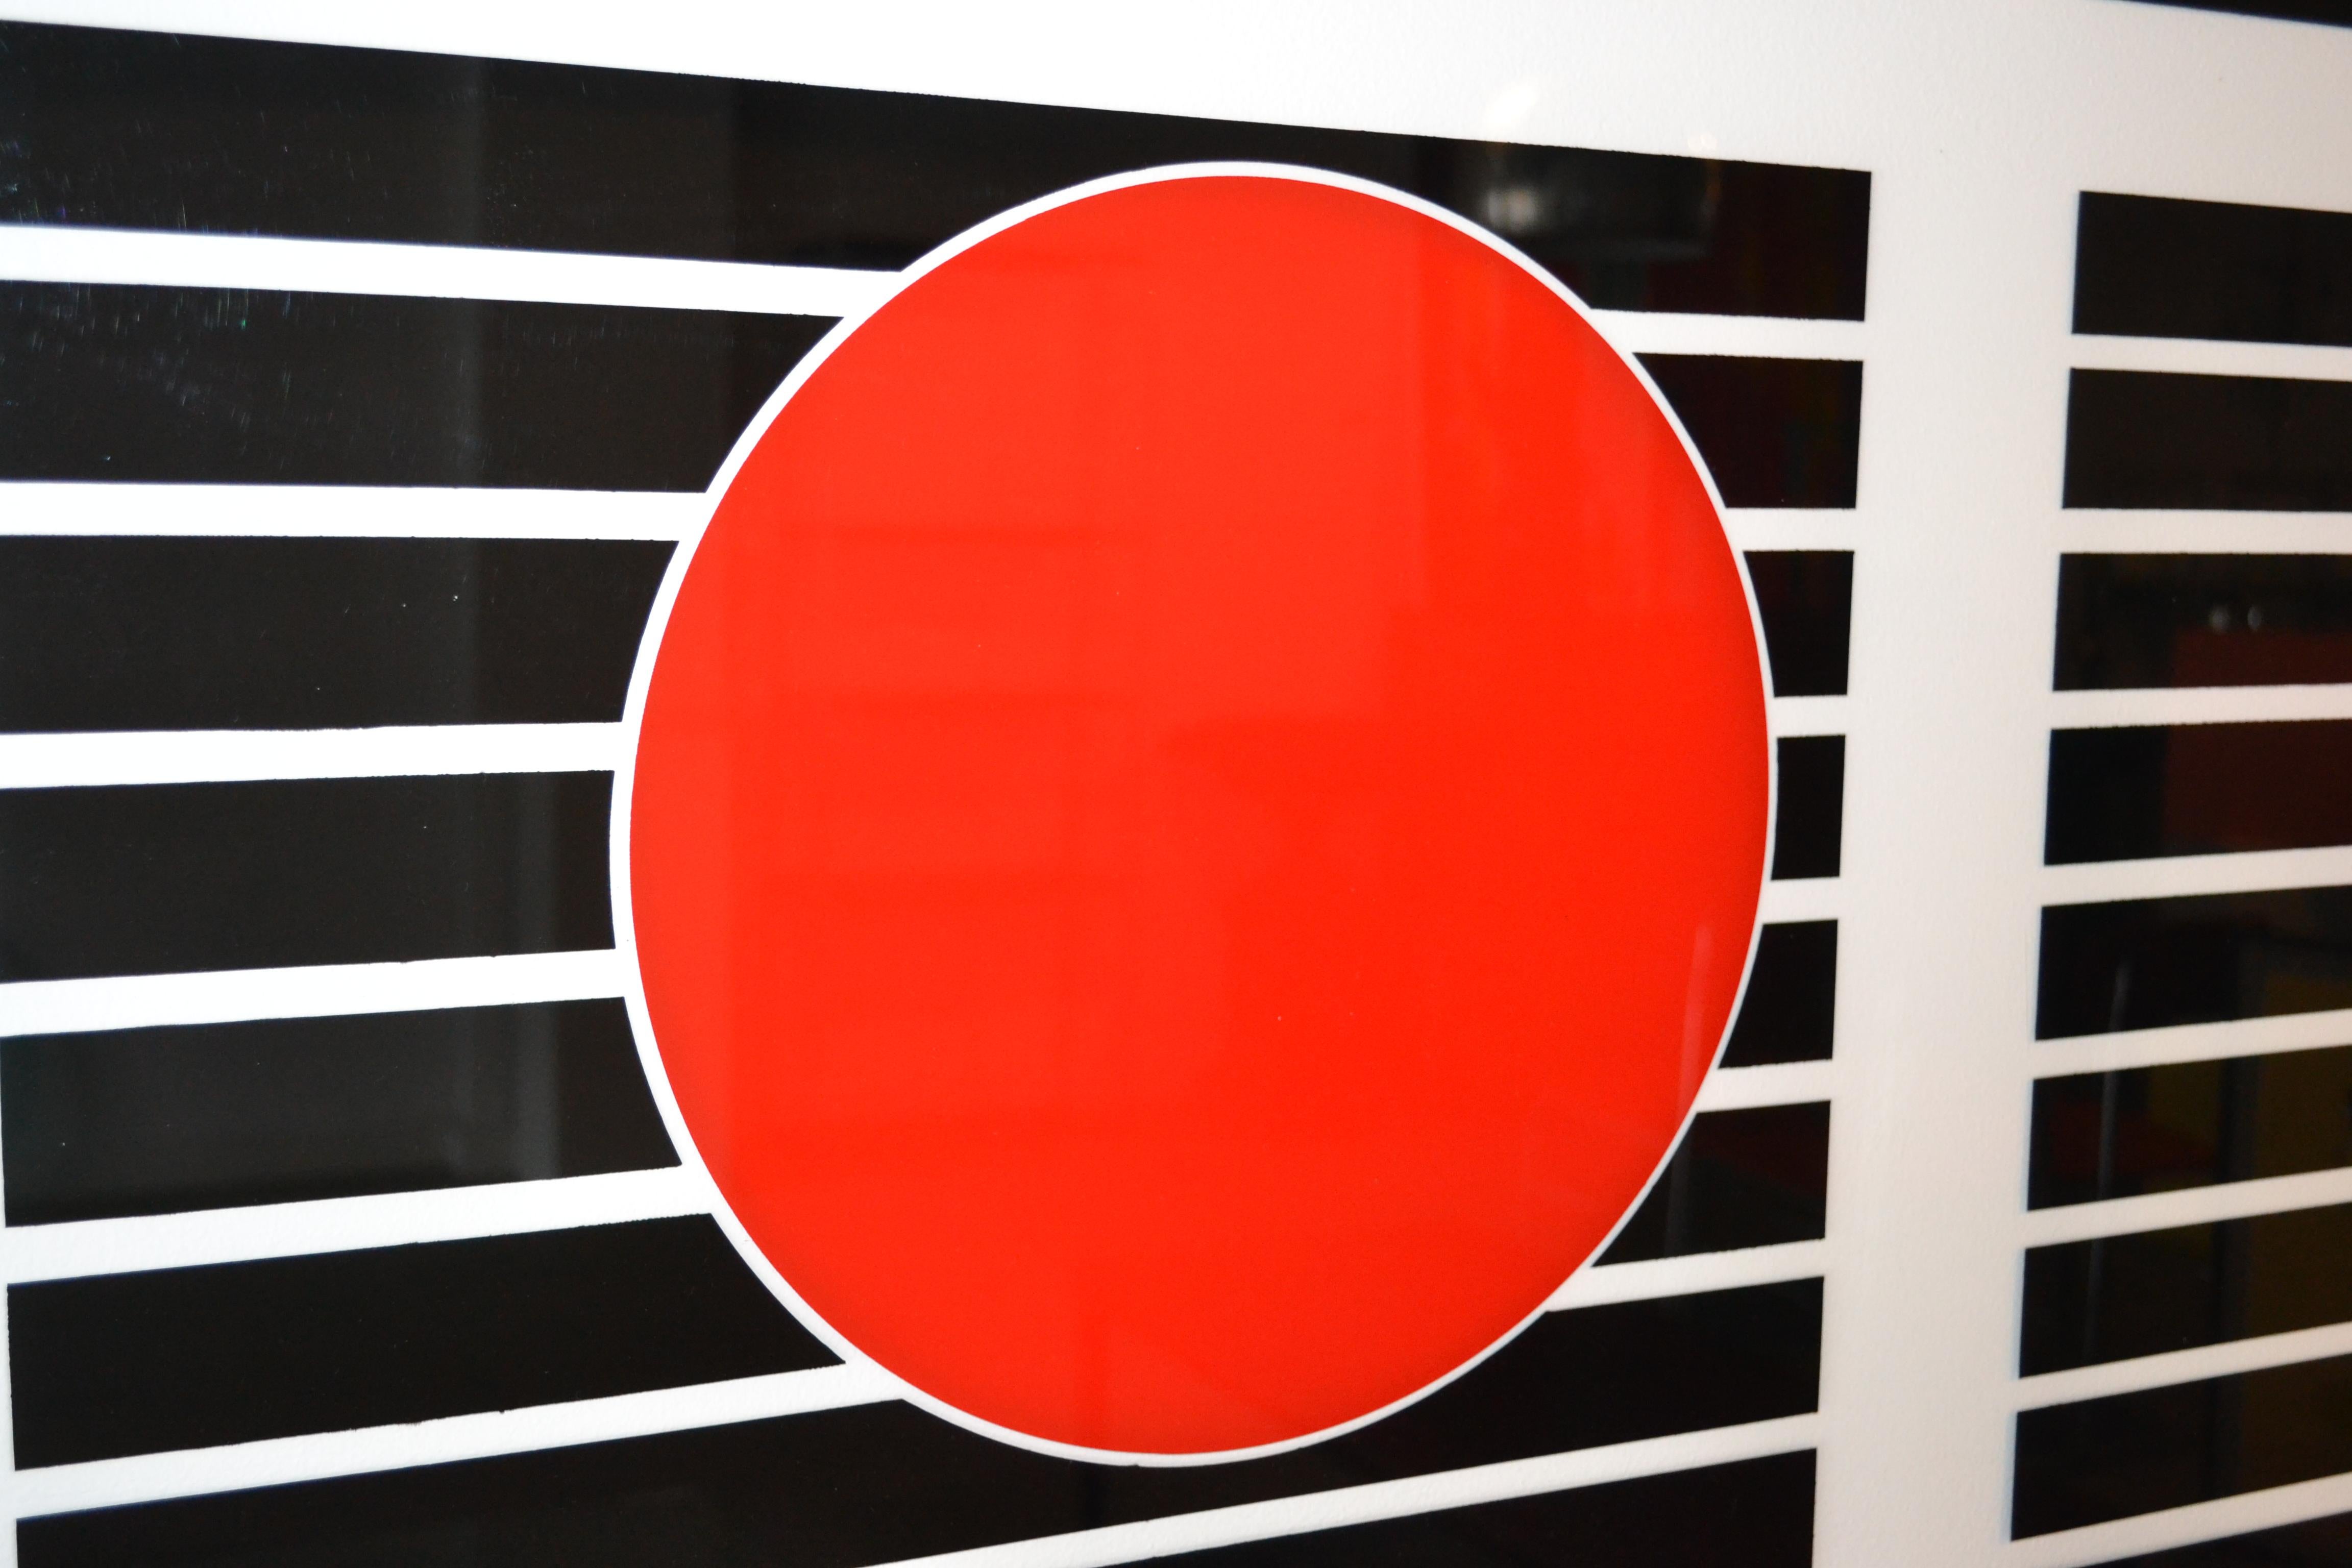 Very cool midcentury Pop Art geometric pattern printed on plexiglass, mounting brackets included, signed.